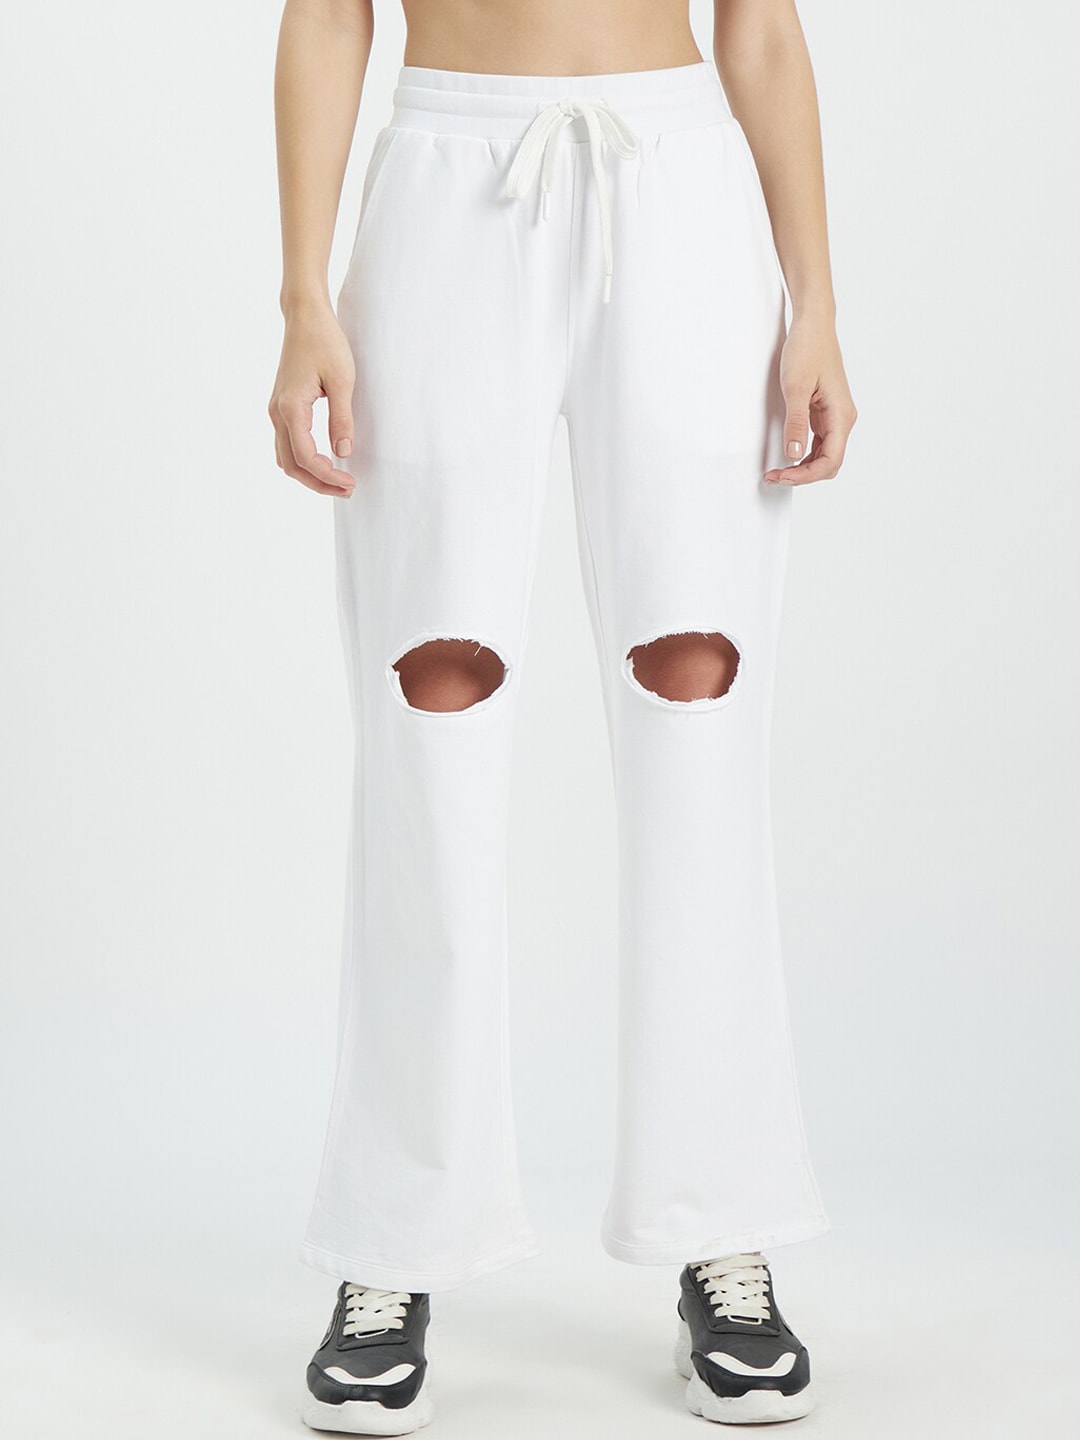 Buy EDRIO EDRIO Women White Solid Ripped Cotton Track Pants at Redfynd